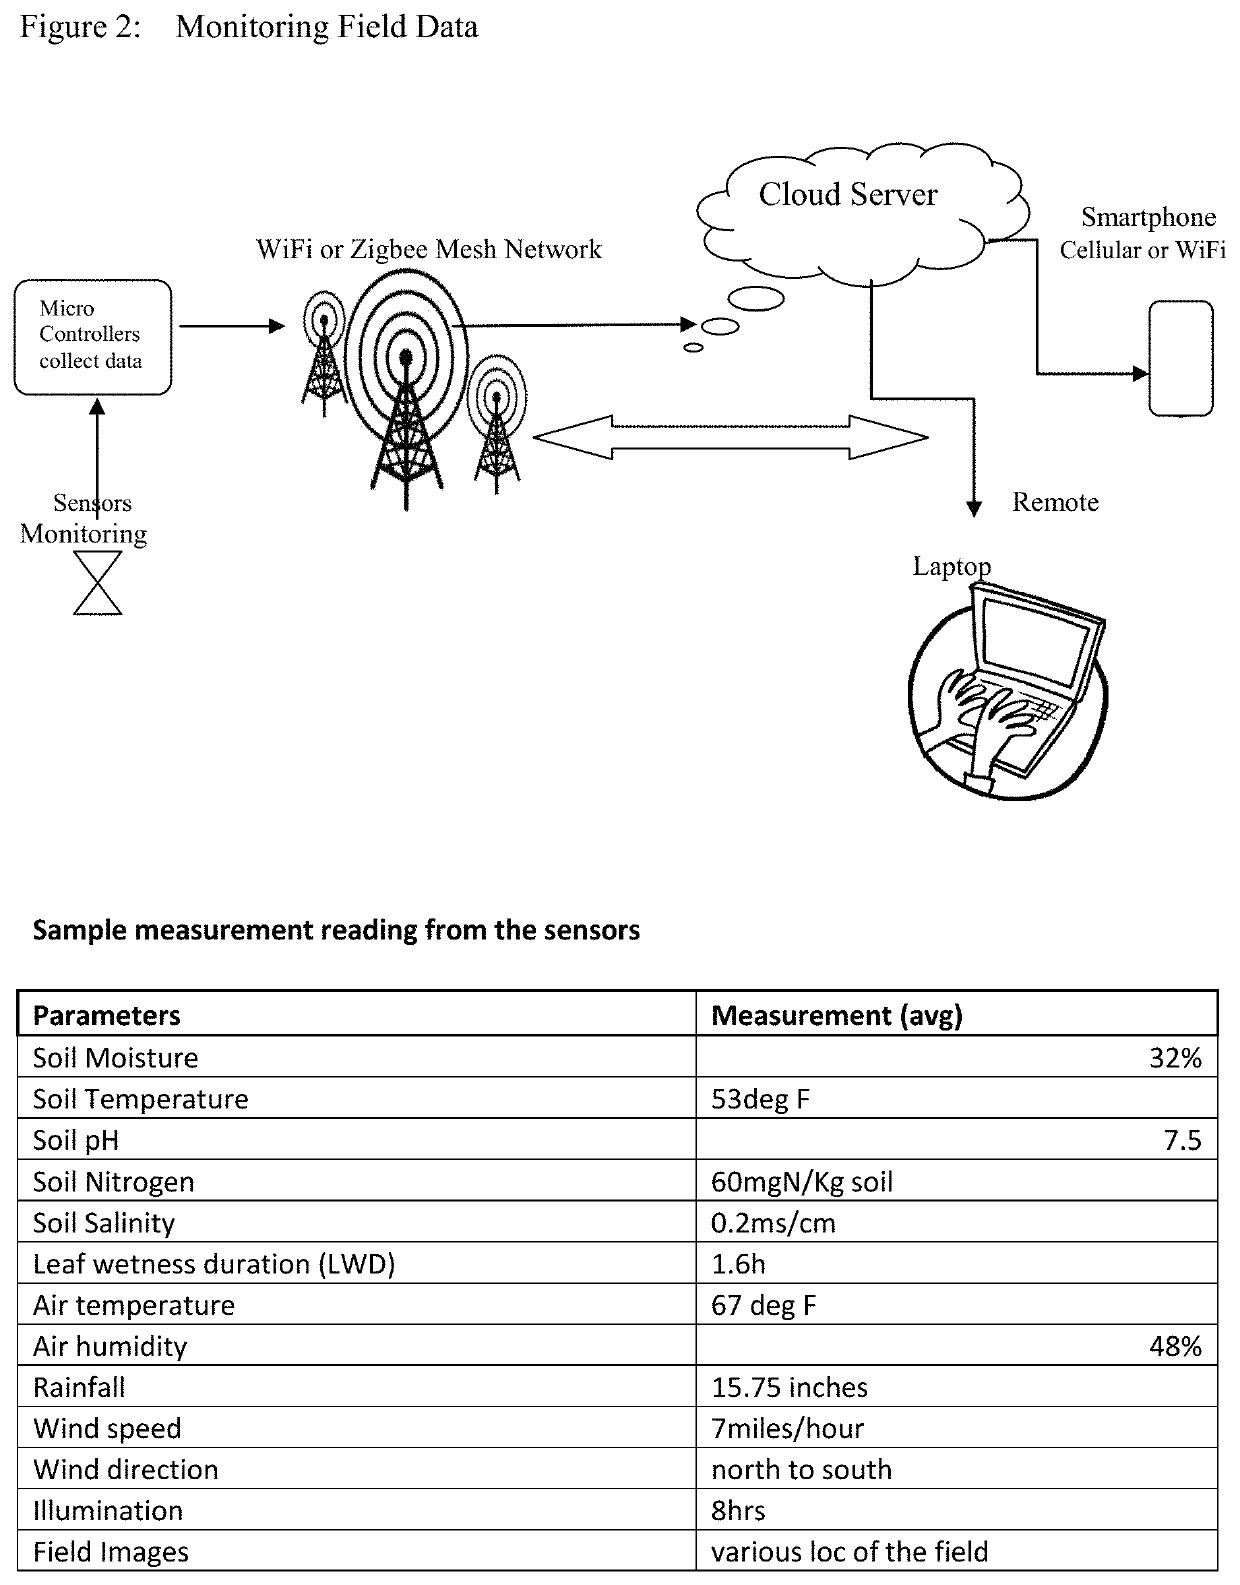 Integrated IoT (Internet of Things) system solution for smart agriculture management